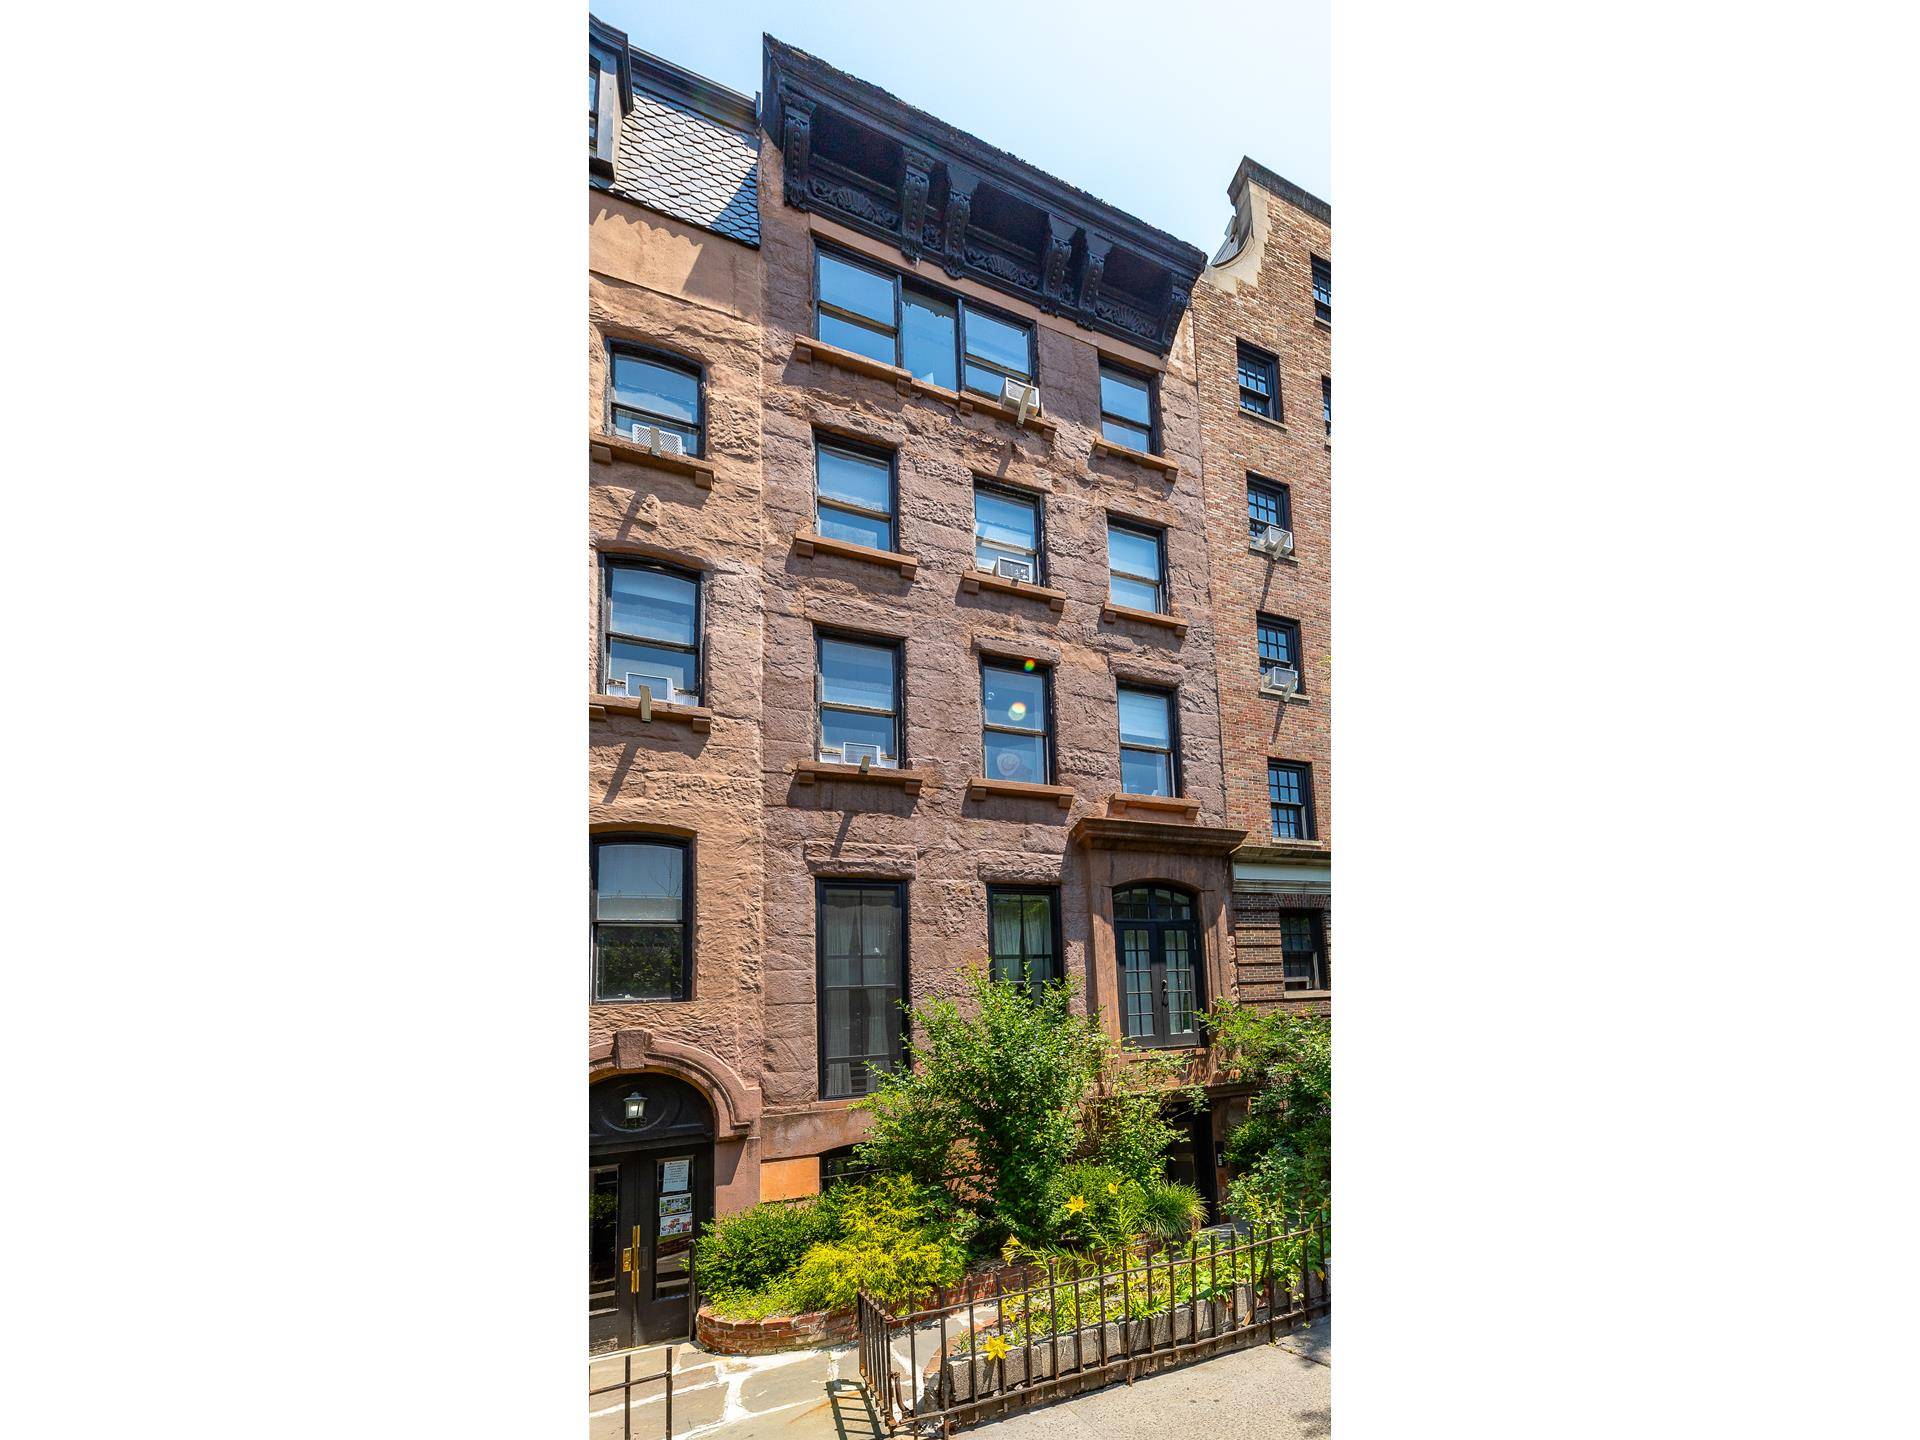 47 West 22nd Street is a 100 free market, six unit multifamily townhouse property located in the heart of the West Chelsea neighborhood of Manhattan.